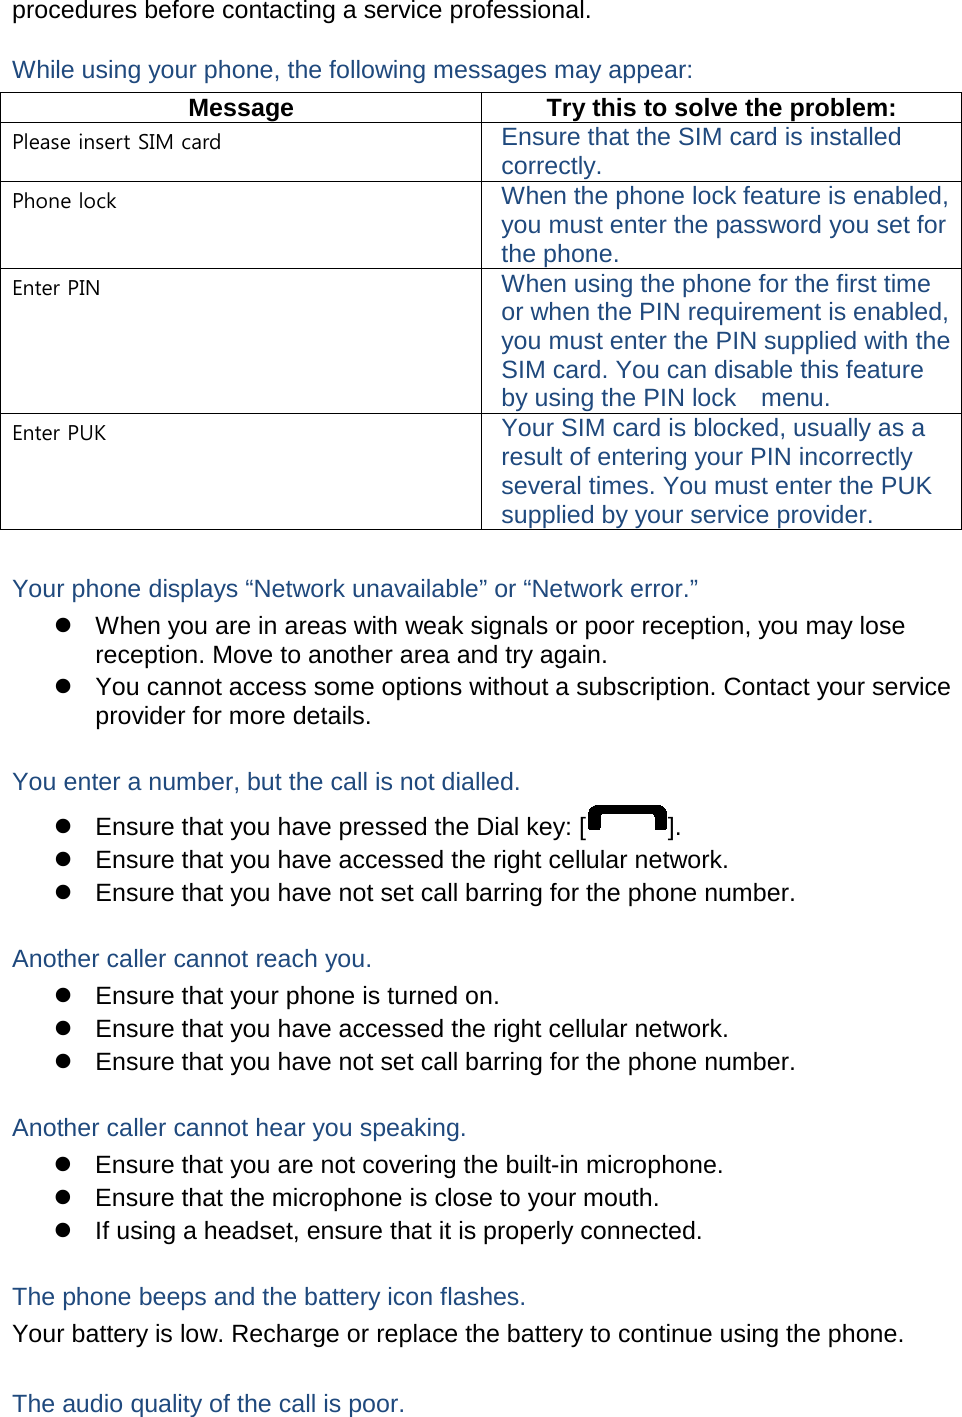 procedures before contacting a service professional. While using your phone, the following messages may appear: Message Try this to solve the problem: Please insert SIM card Ensure that the SIM card is installed correctly. Phone lock When the phone lock feature is enabled, you must enter the password you set for the phone. Enter PIN When using the phone for the first time or when the PIN requirement is enabled, you must enter the PIN supplied with the SIM card. You can disable this feature by using the PIN lock    menu. Enter PUK Your SIM card is blocked, usually as a result of entering your PIN incorrectly several times. You must enter the PUK supplied by your service provider.    Your phone displays “Network unavailable” or “Network error.”  When you are in areas with weak signals or poor reception, you may lose reception. Move to another area and try again.  You cannot access some options without a subscription. Contact your service provider for more details.  You enter a number, but the call is not dialled.  Ensure that you have pressed the Dial key: [ ].  Ensure that you have accessed the right cellular network.  Ensure that you have not set call barring for the phone number.  Another caller cannot reach you.  Ensure that your phone is turned on.  Ensure that you have accessed the right cellular network.  Ensure that you have not set call barring for the phone number.  Another caller cannot hear you speaking.  Ensure that you are not covering the built-in microphone.  Ensure that the microphone is close to your mouth.   If using a headset, ensure that it is properly connected.  The phone beeps and the battery icon flashes. Your battery is low. Recharge or replace the battery to continue using the phone.  The audio quality of the call is poor. 